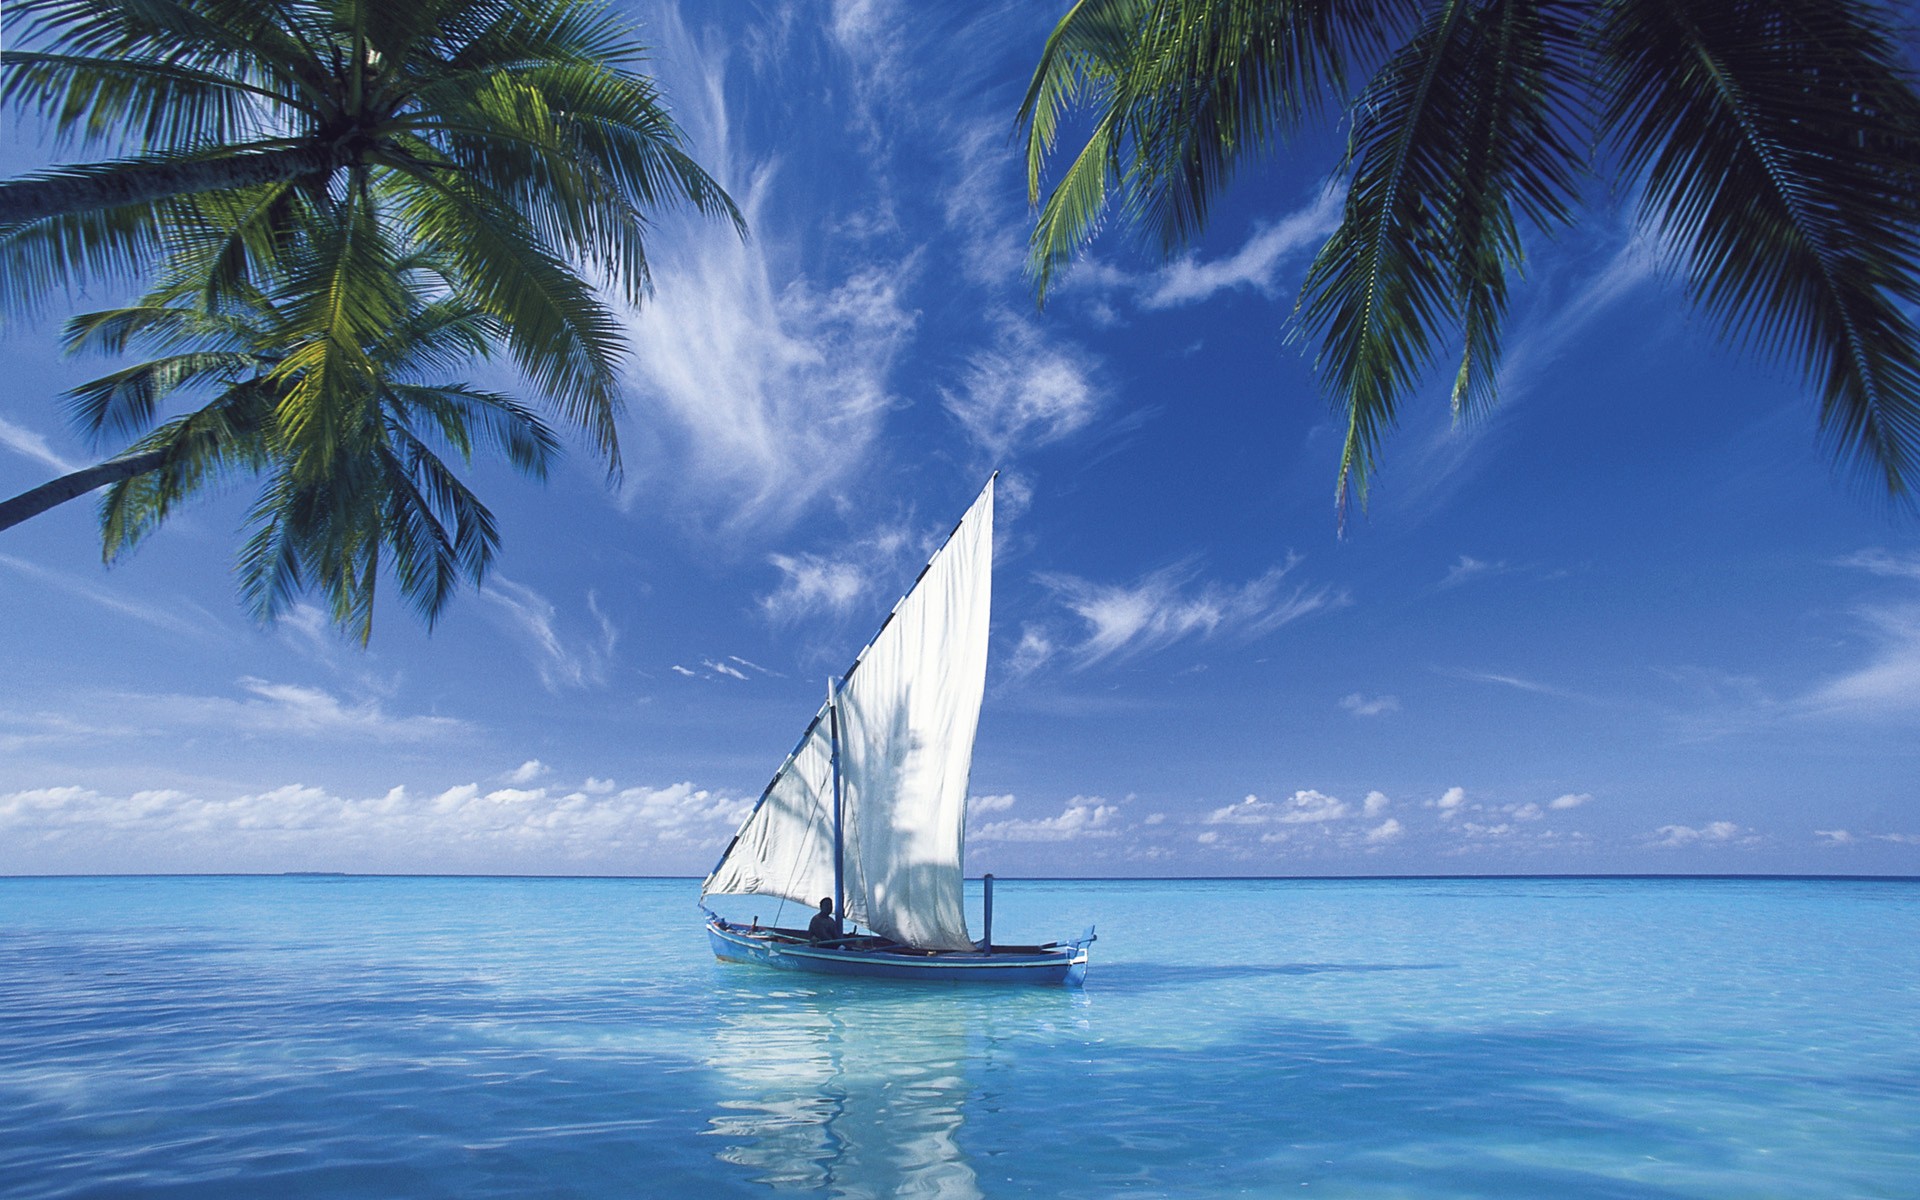 A serene boat scene on the water, surrounded by nature and a clear blue sky.